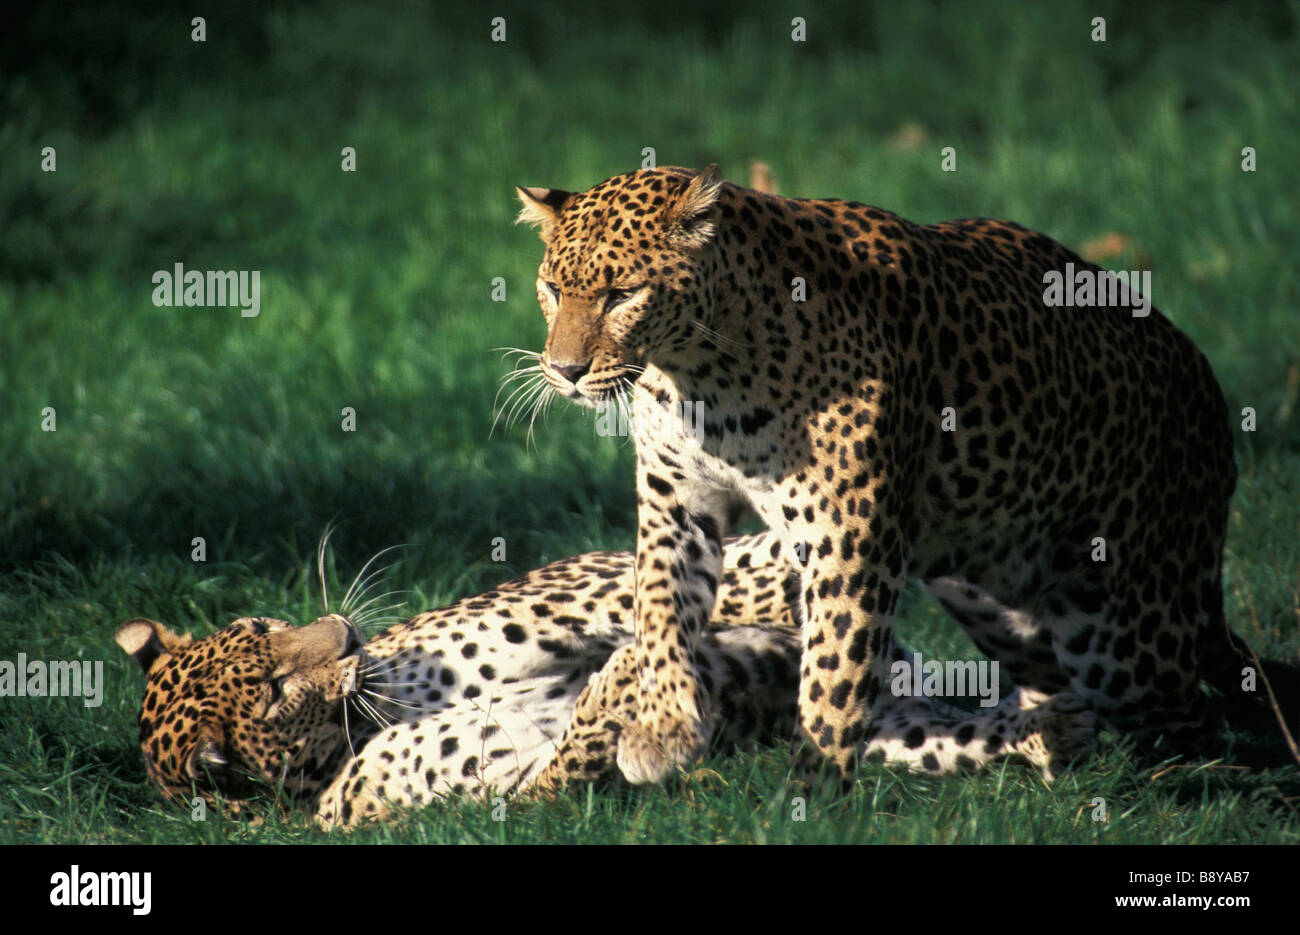 Leopards pair mating Panthera pardus adult affection affectionate Africa animal animal communication animal head animal portrait Stock Photo